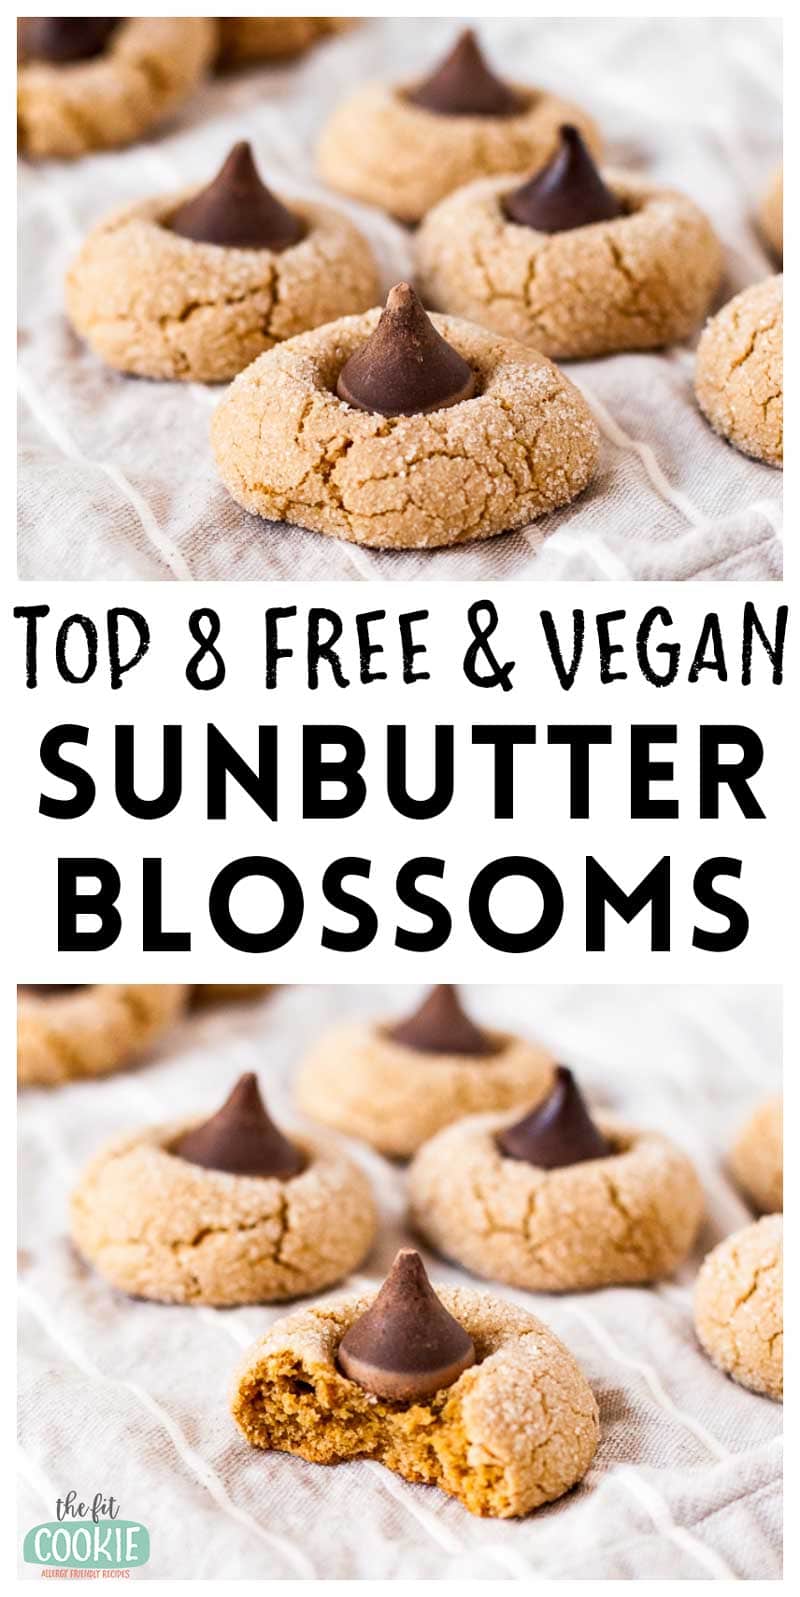 photo collage of sunbutter blossom cookies